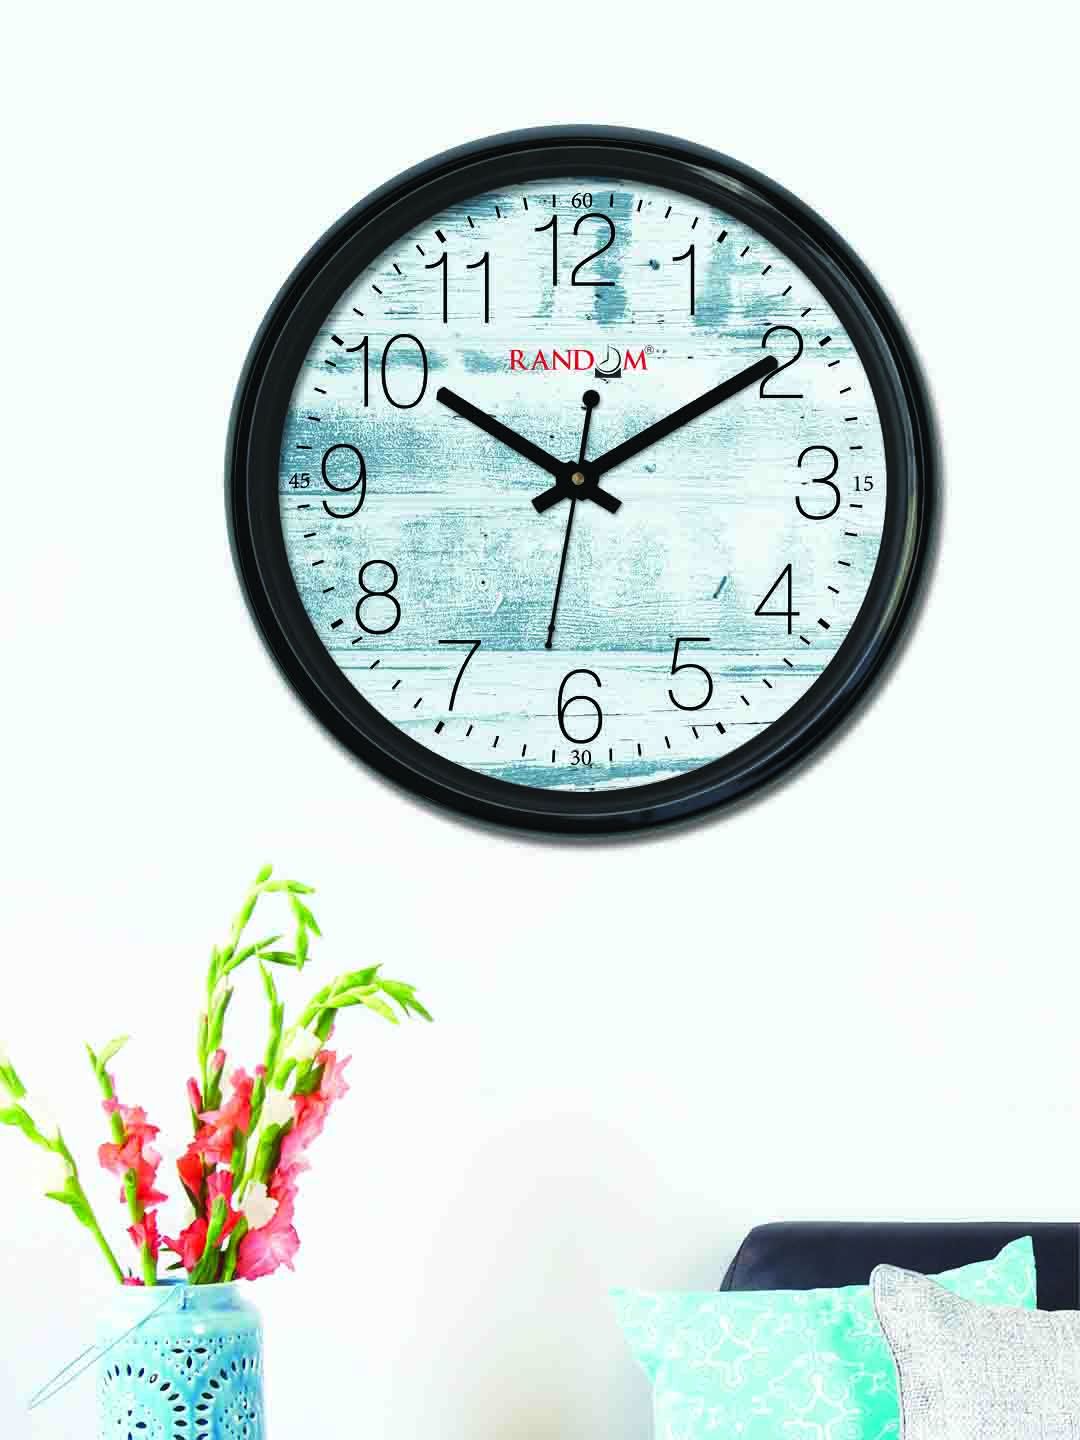 RANDOM Blue Round Printed 30 cm Analogue Wall Clock Price in India